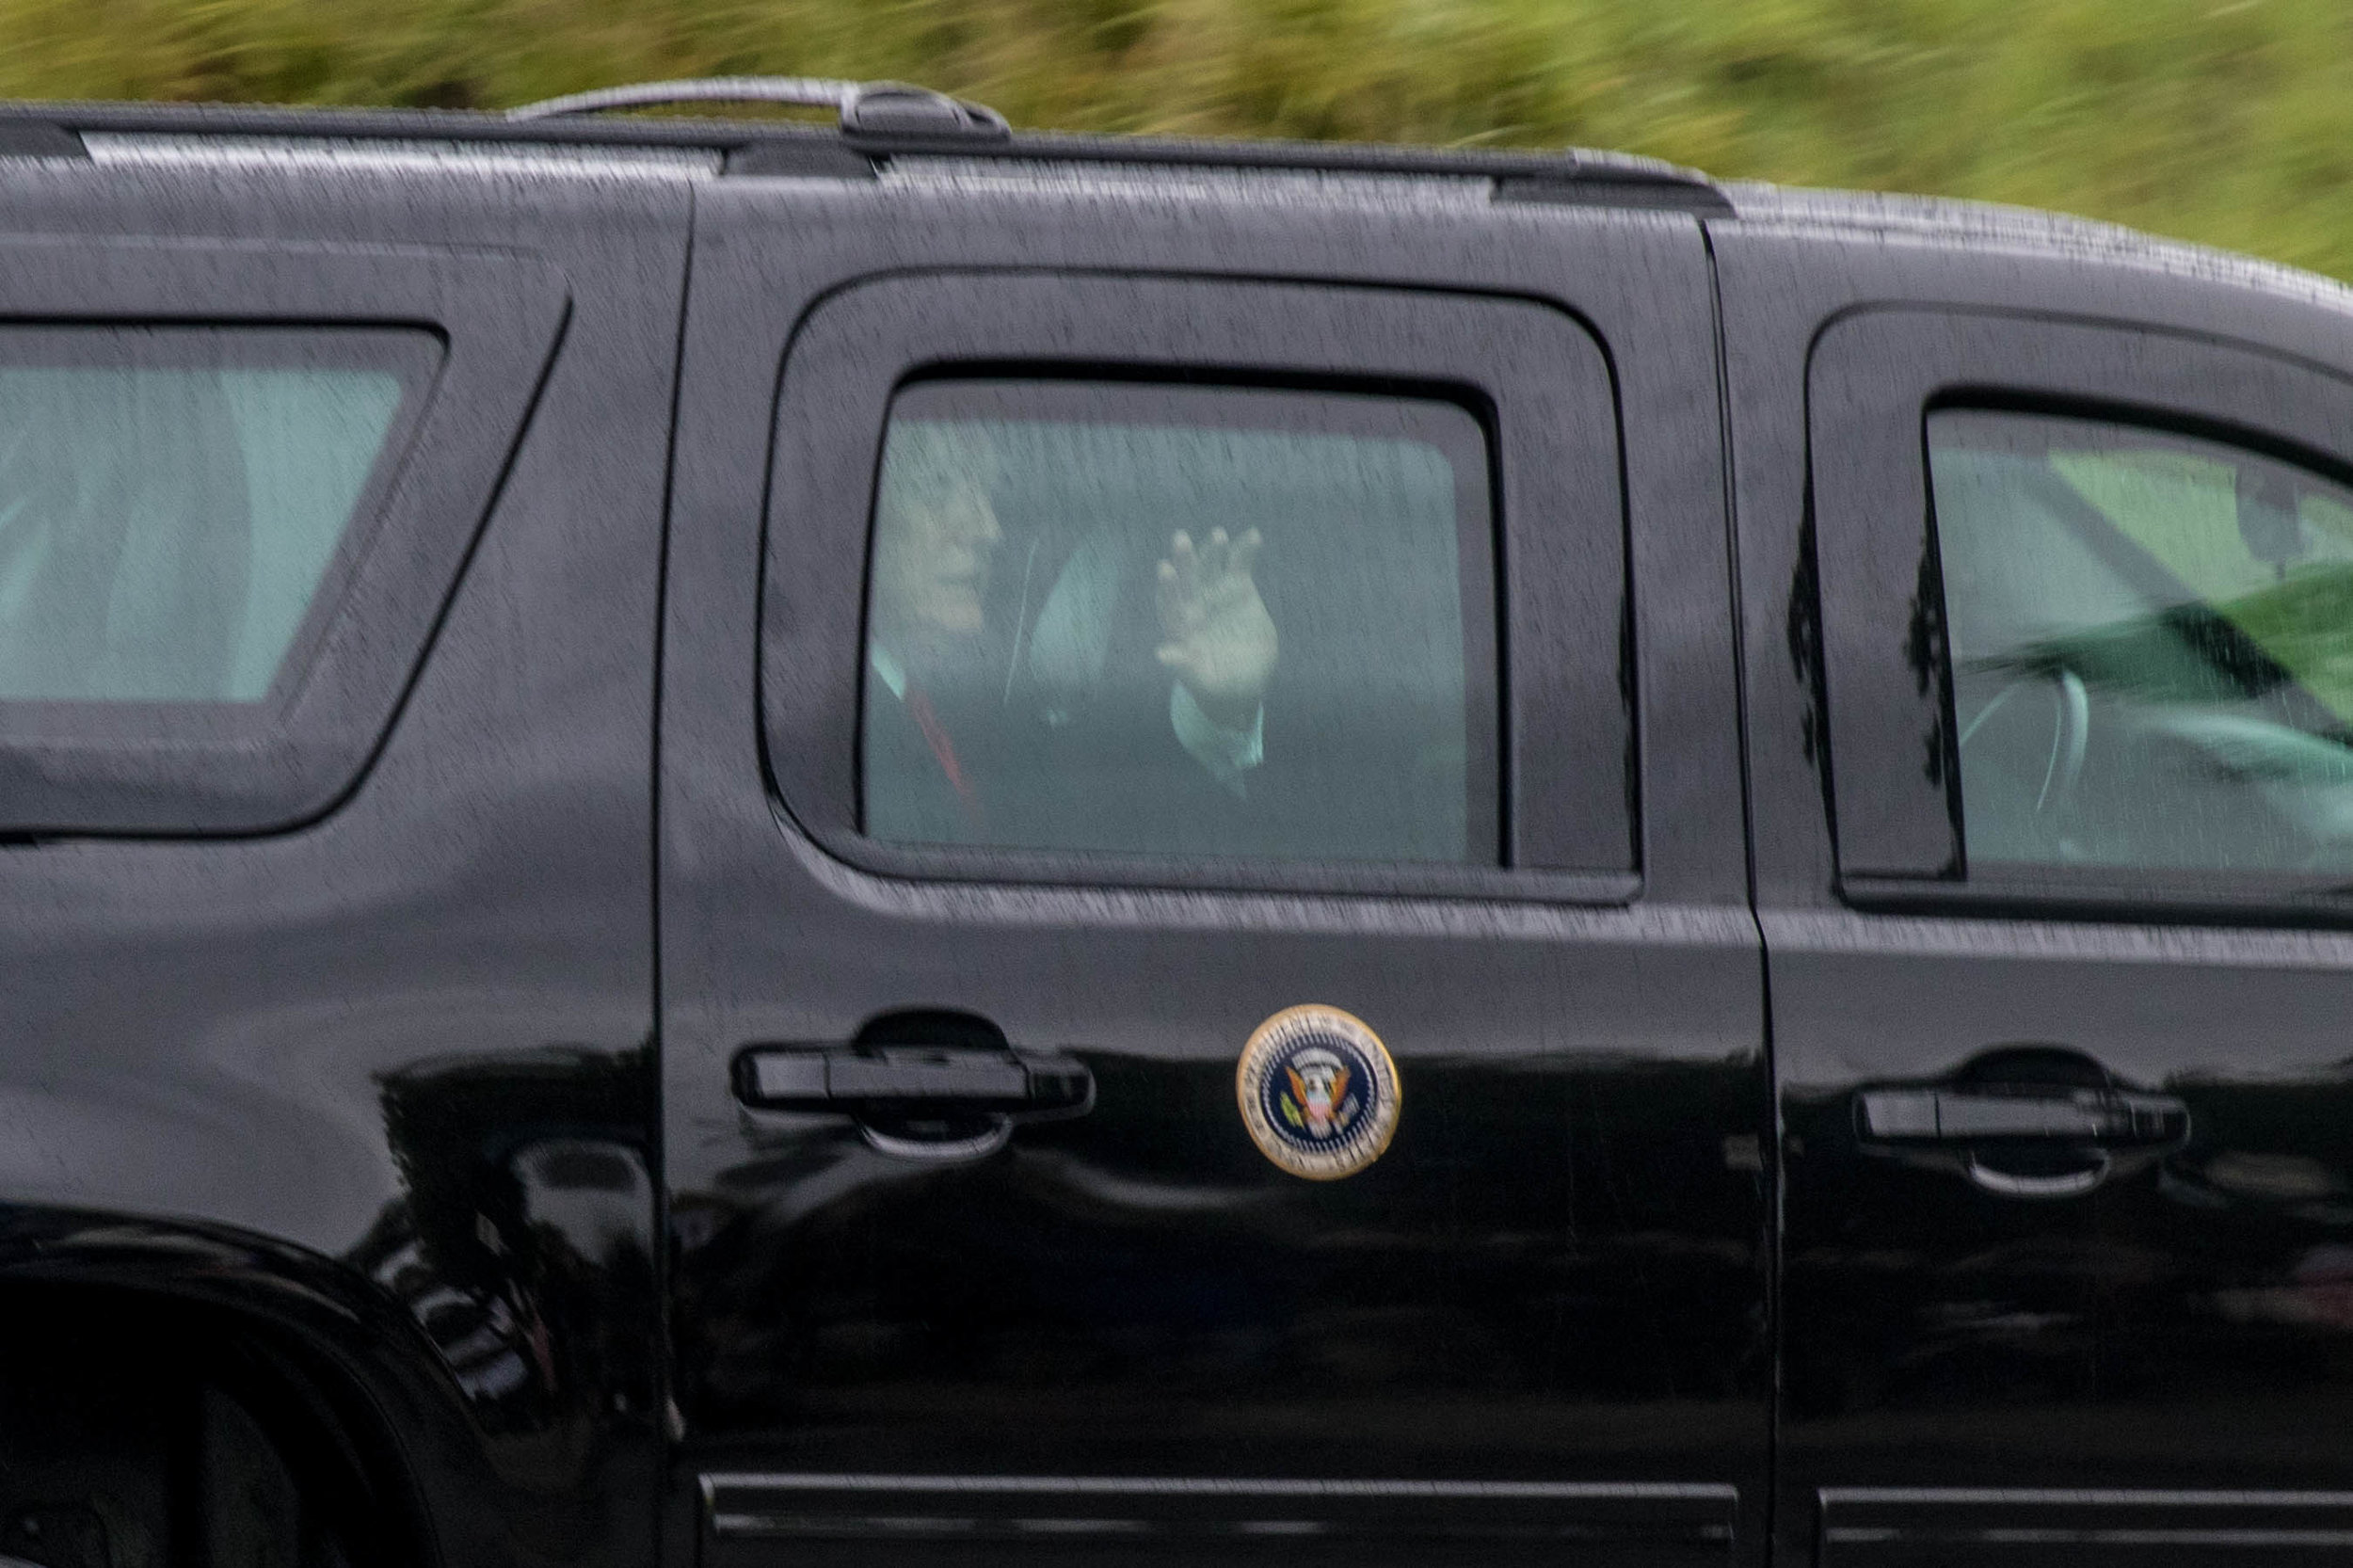  President Donald Trump waves at protestors of his presidency as he leaves the Santa Monica Airport on Tuesday, March 13, 2018 in Santa Monica, California. (Zane Meyer-Thornton / Corsair Photo) 